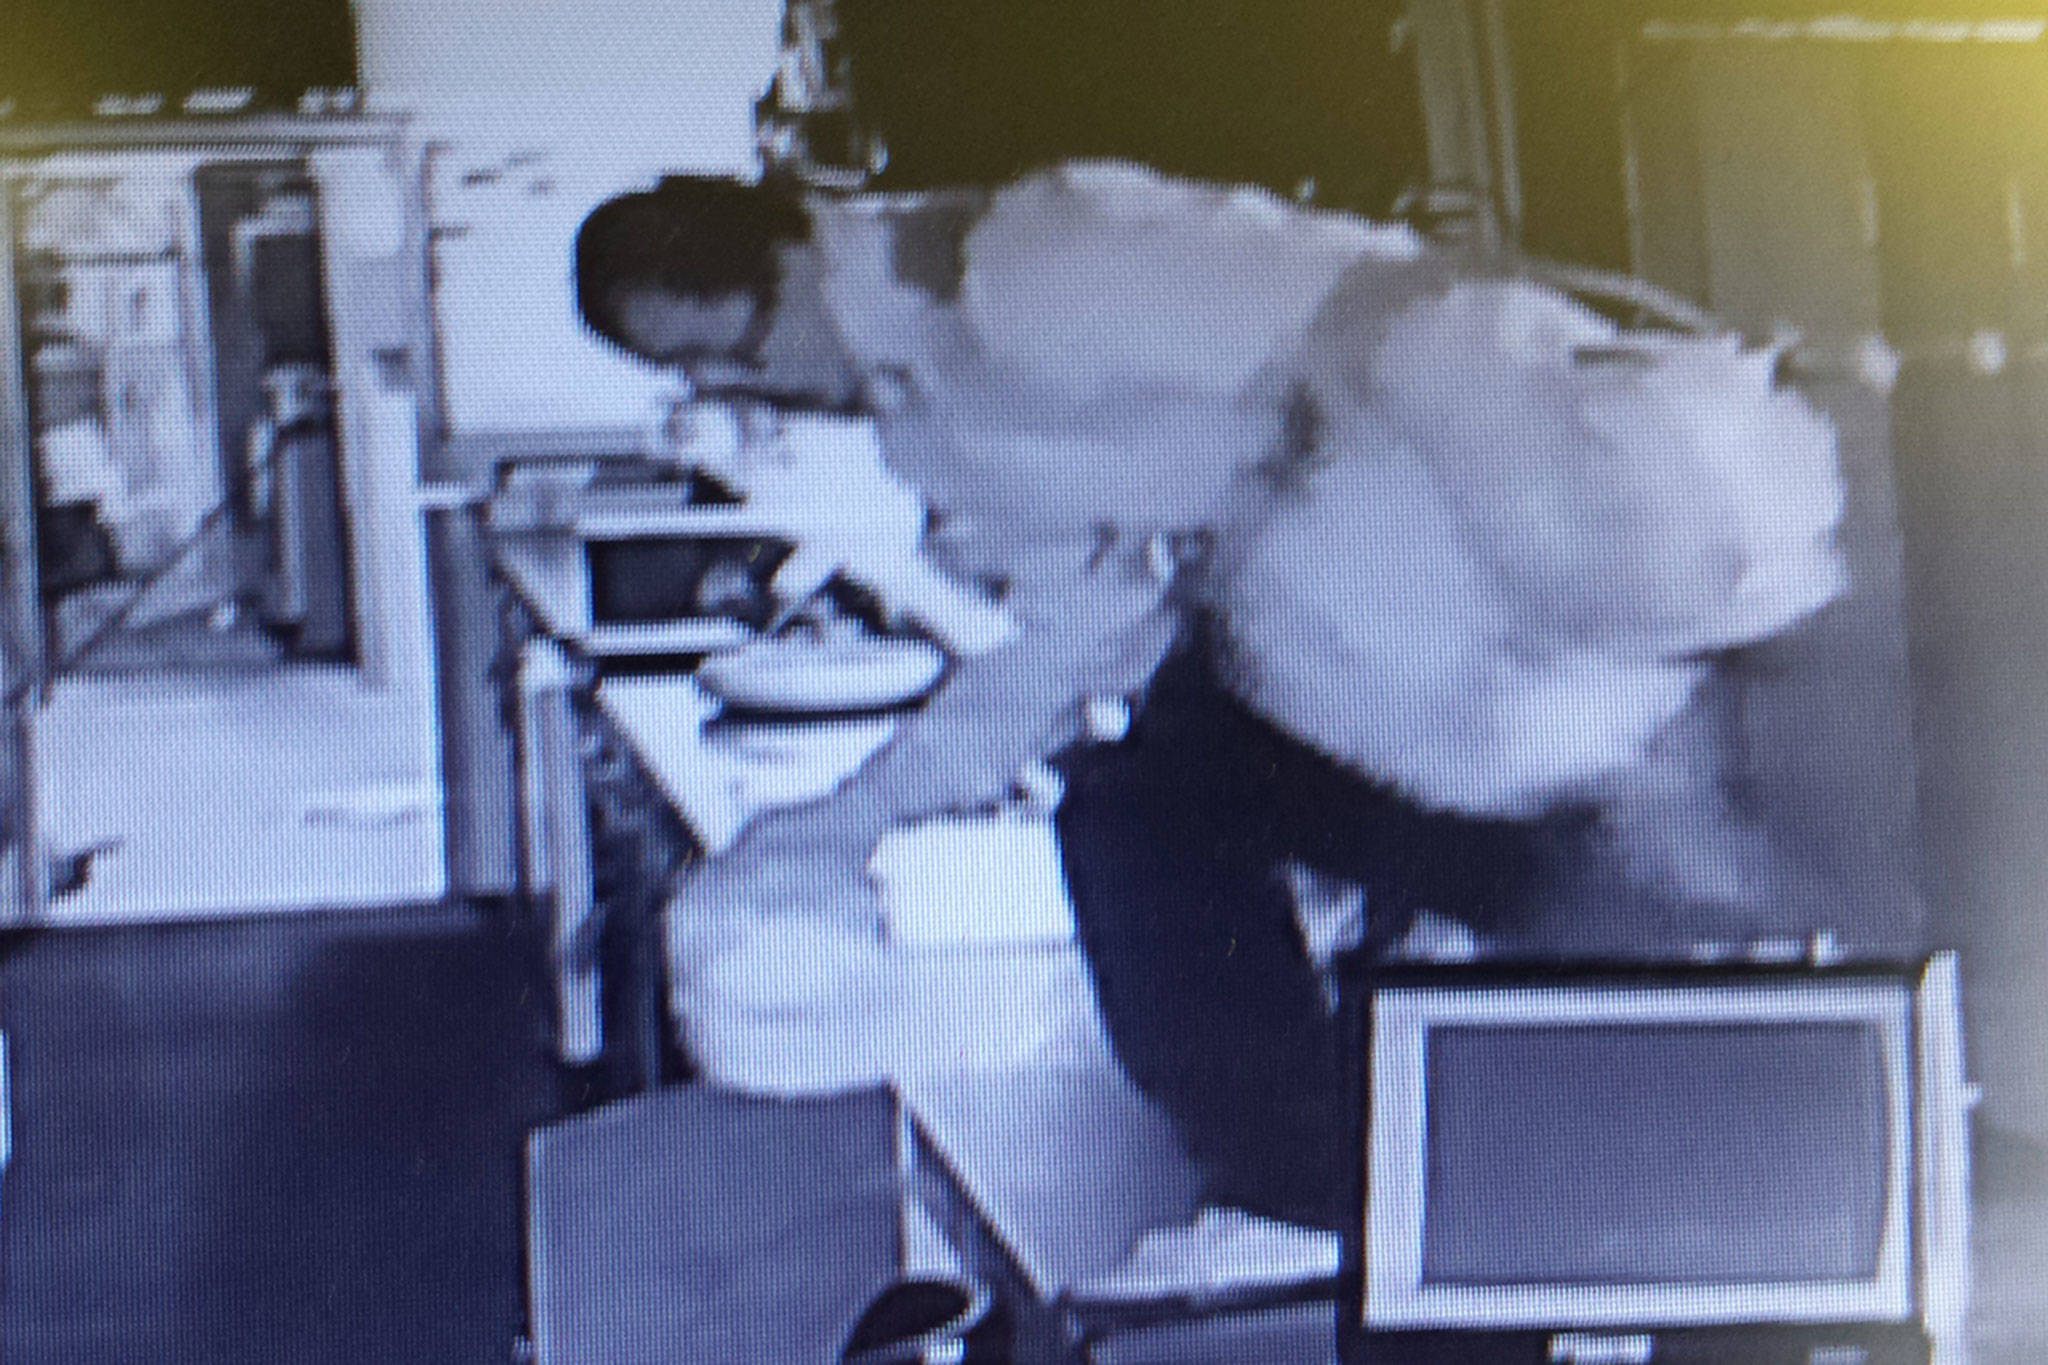 Sequim Police officers describe the burglary suspect at the Sequim VFW as a male between 5’5”-5’9” weighing 140-170 pounds with dark hair. Photo courtesy of Sequim VFW